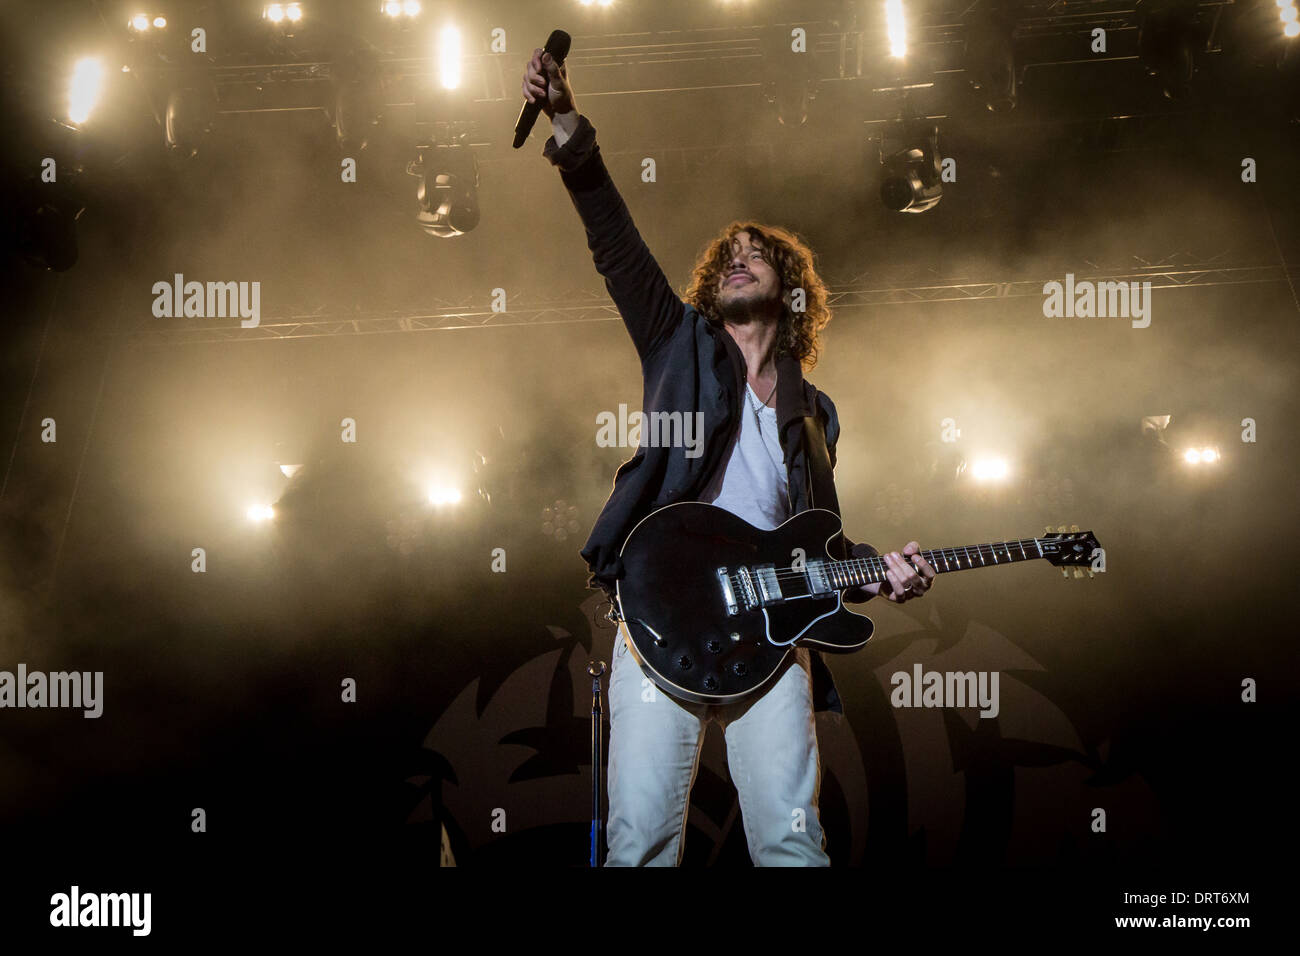 Rho Milan Italy. 04th June 2012. The American rock band SOUNDGARDEN performs live at Arena Fiera di Milano Stock Photo